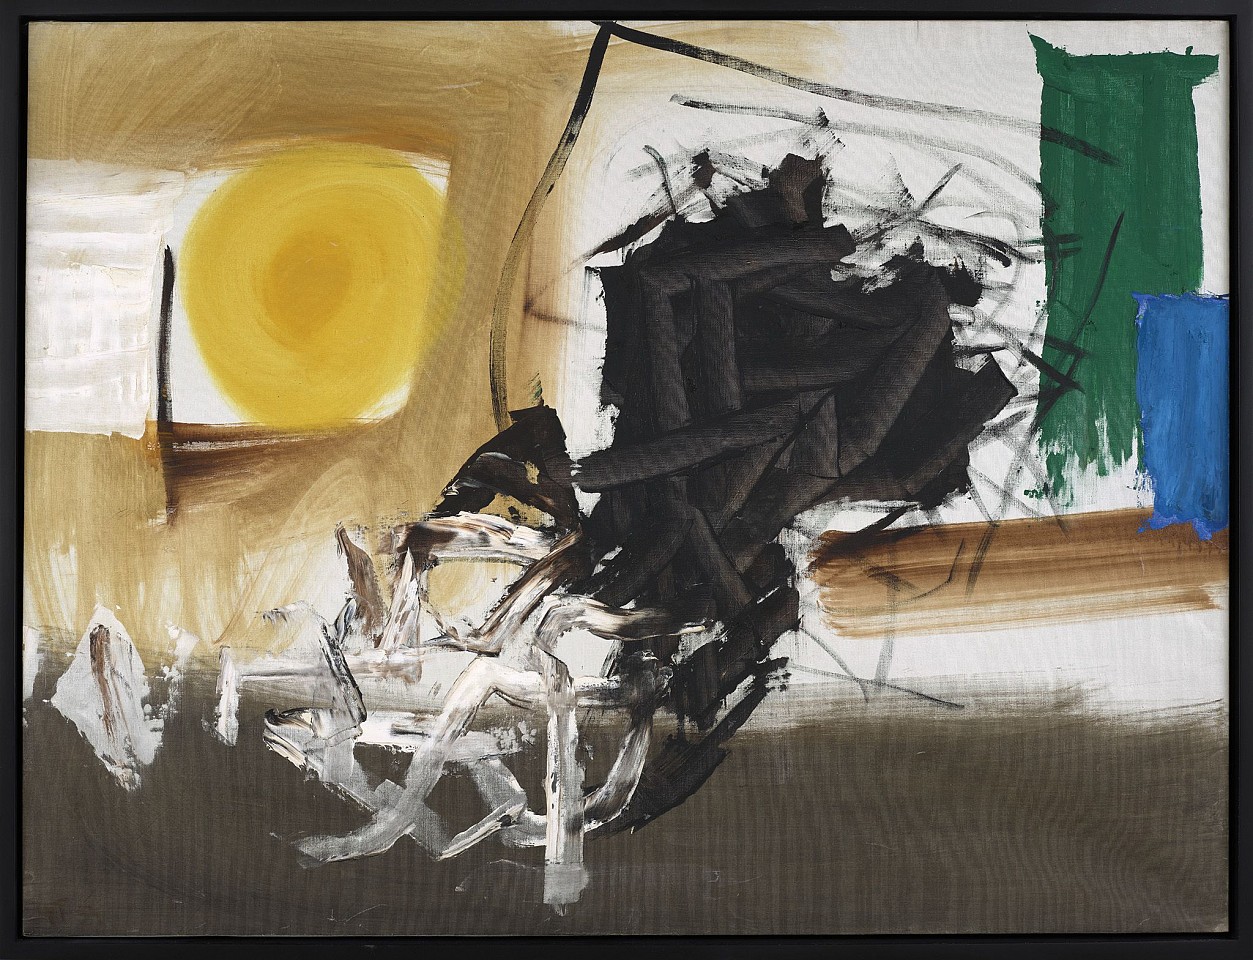 Yvonne Thomas, Lanzarote | SOLD, 1959
Oil on canvas, 38 1/2 x 51 in. (97.8 x 129.5 cm)
THO-00018